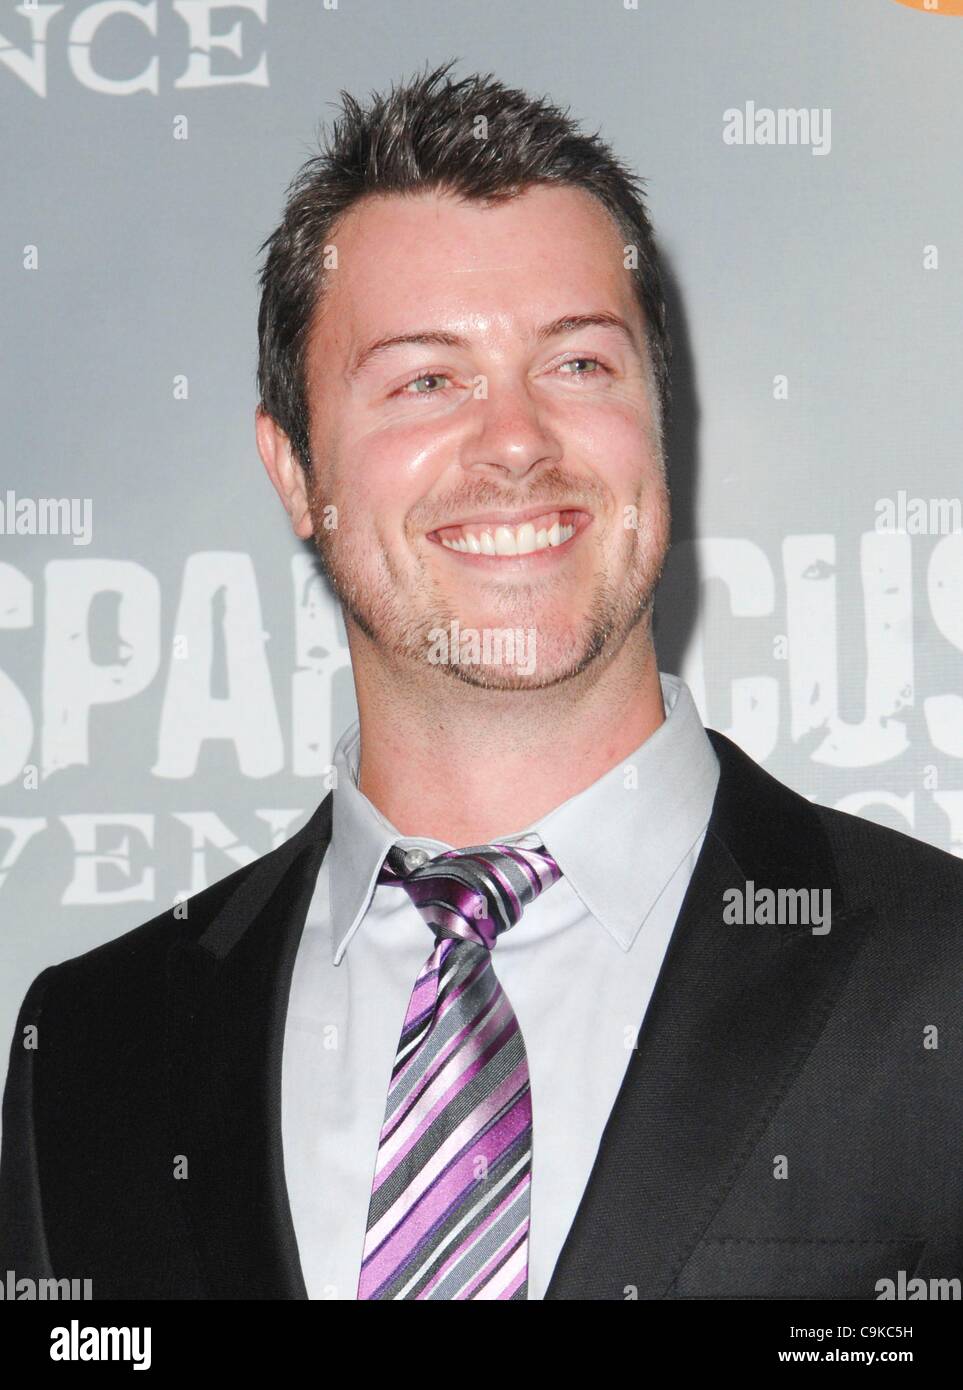 Daniel Feuerriegel at arrivals for SPARTACUS: VENGEANCE Series Premiere, Cinerama Dome at The Arclight Hollywood, Los Angeles, CA January 18, 2012. Photo By: Elizabeth Goodenough/Everett Collection Stock Photo